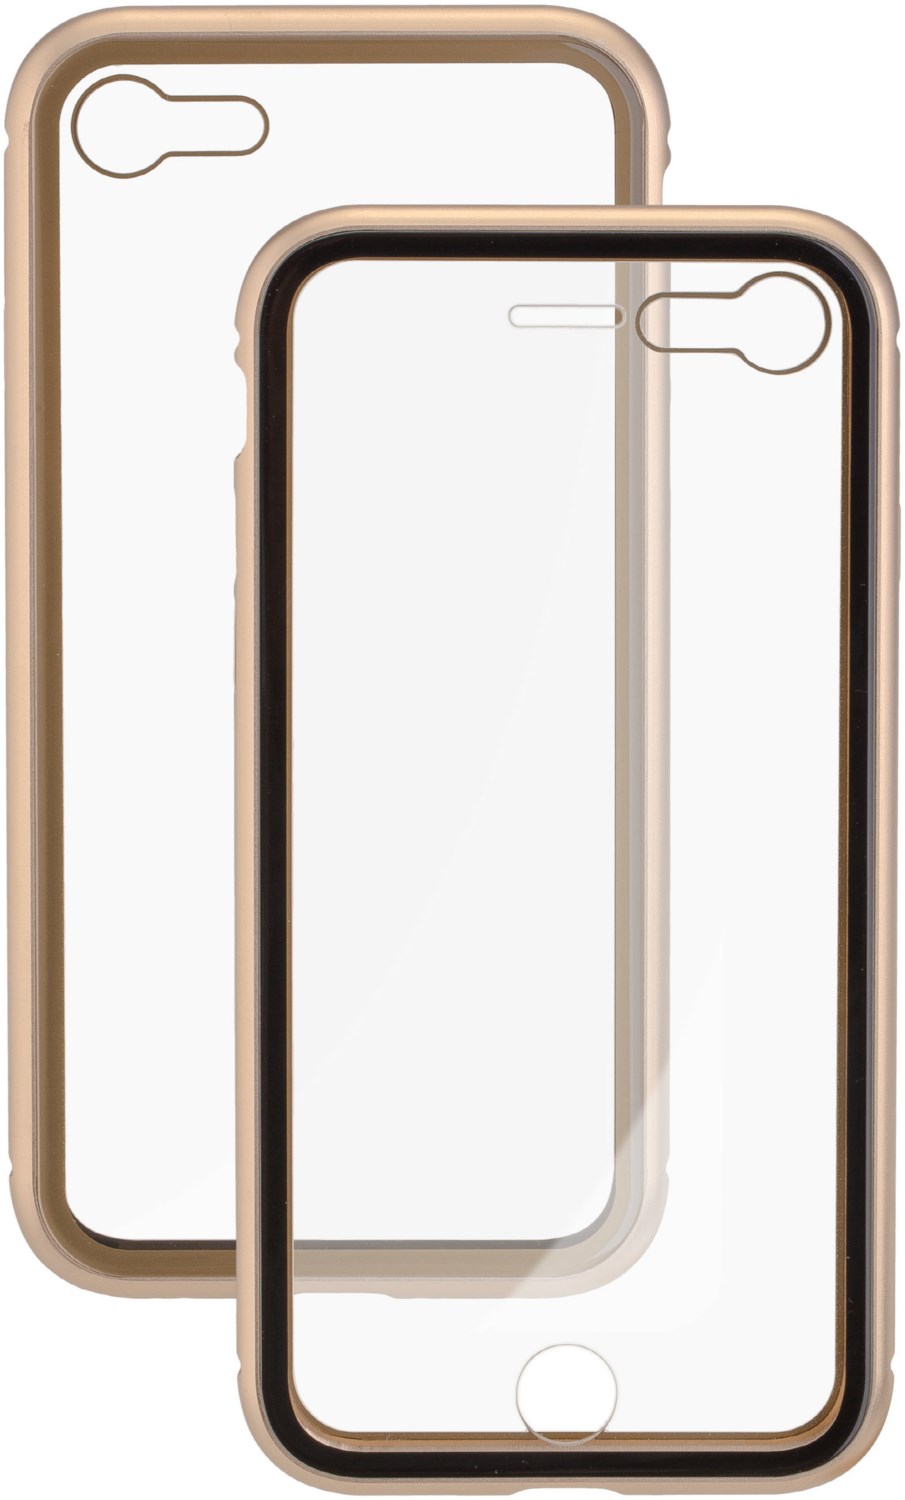 MAGNET COVER Duo Glas für iPhone 7/8 gold